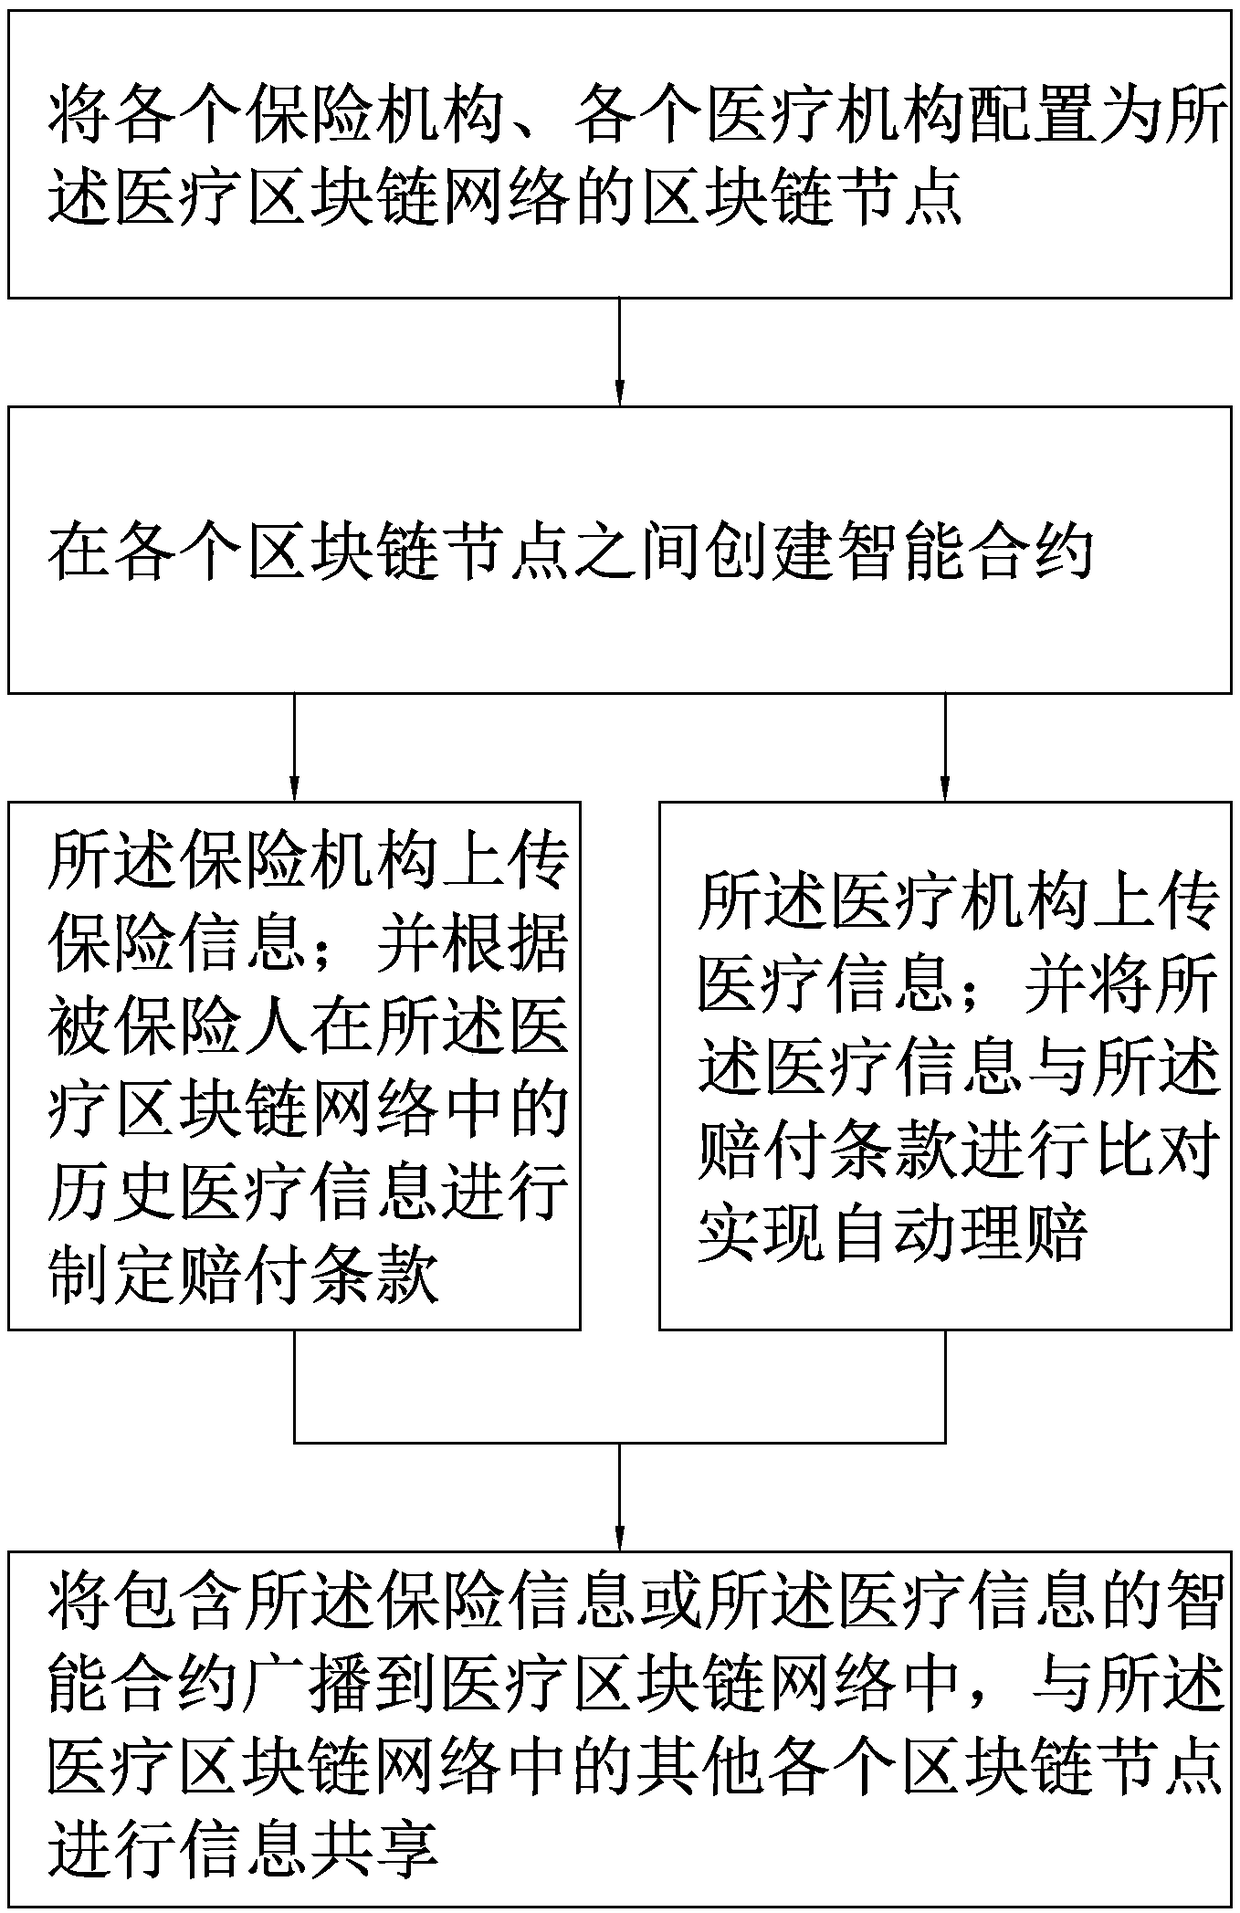 Block chain technology-based personal insurance decision support method and system